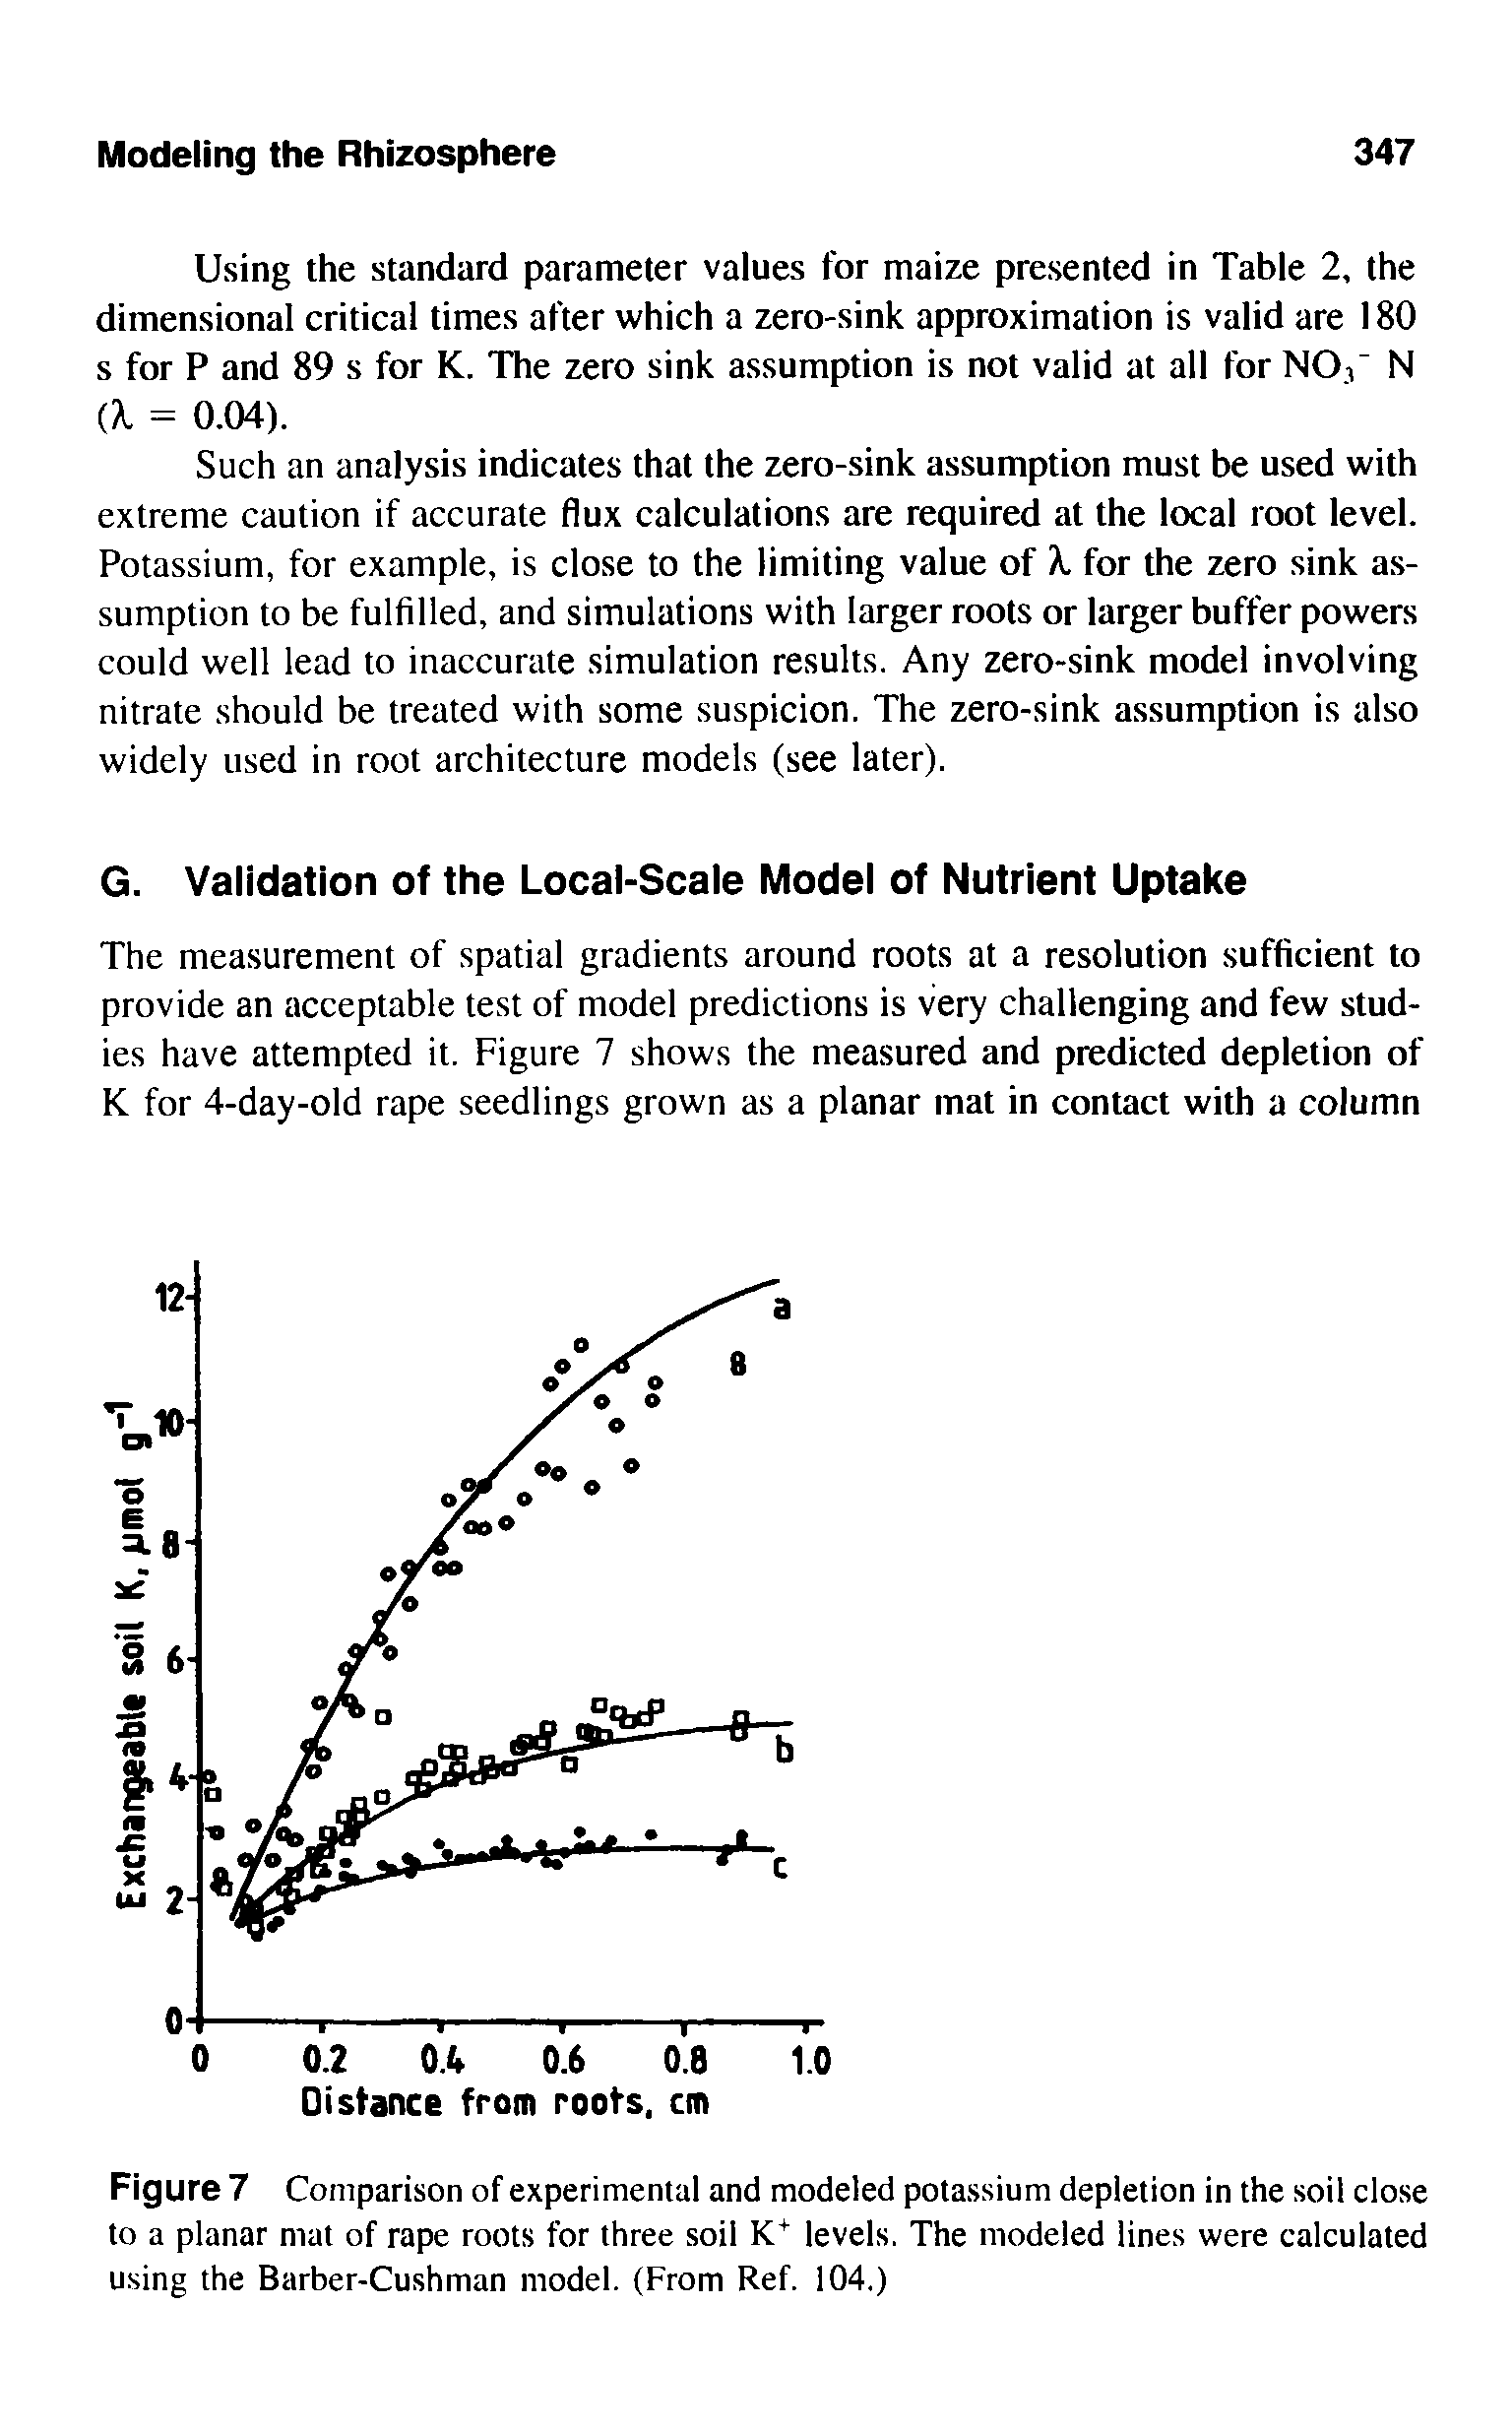 Figure 7 Comparison of experimental and modeled potassium depletion in the soil close to a planar mat of rape roots for three soil levels. The modeled lines were calculated using the Barber-Cushman model. (From Ref. 104.)...